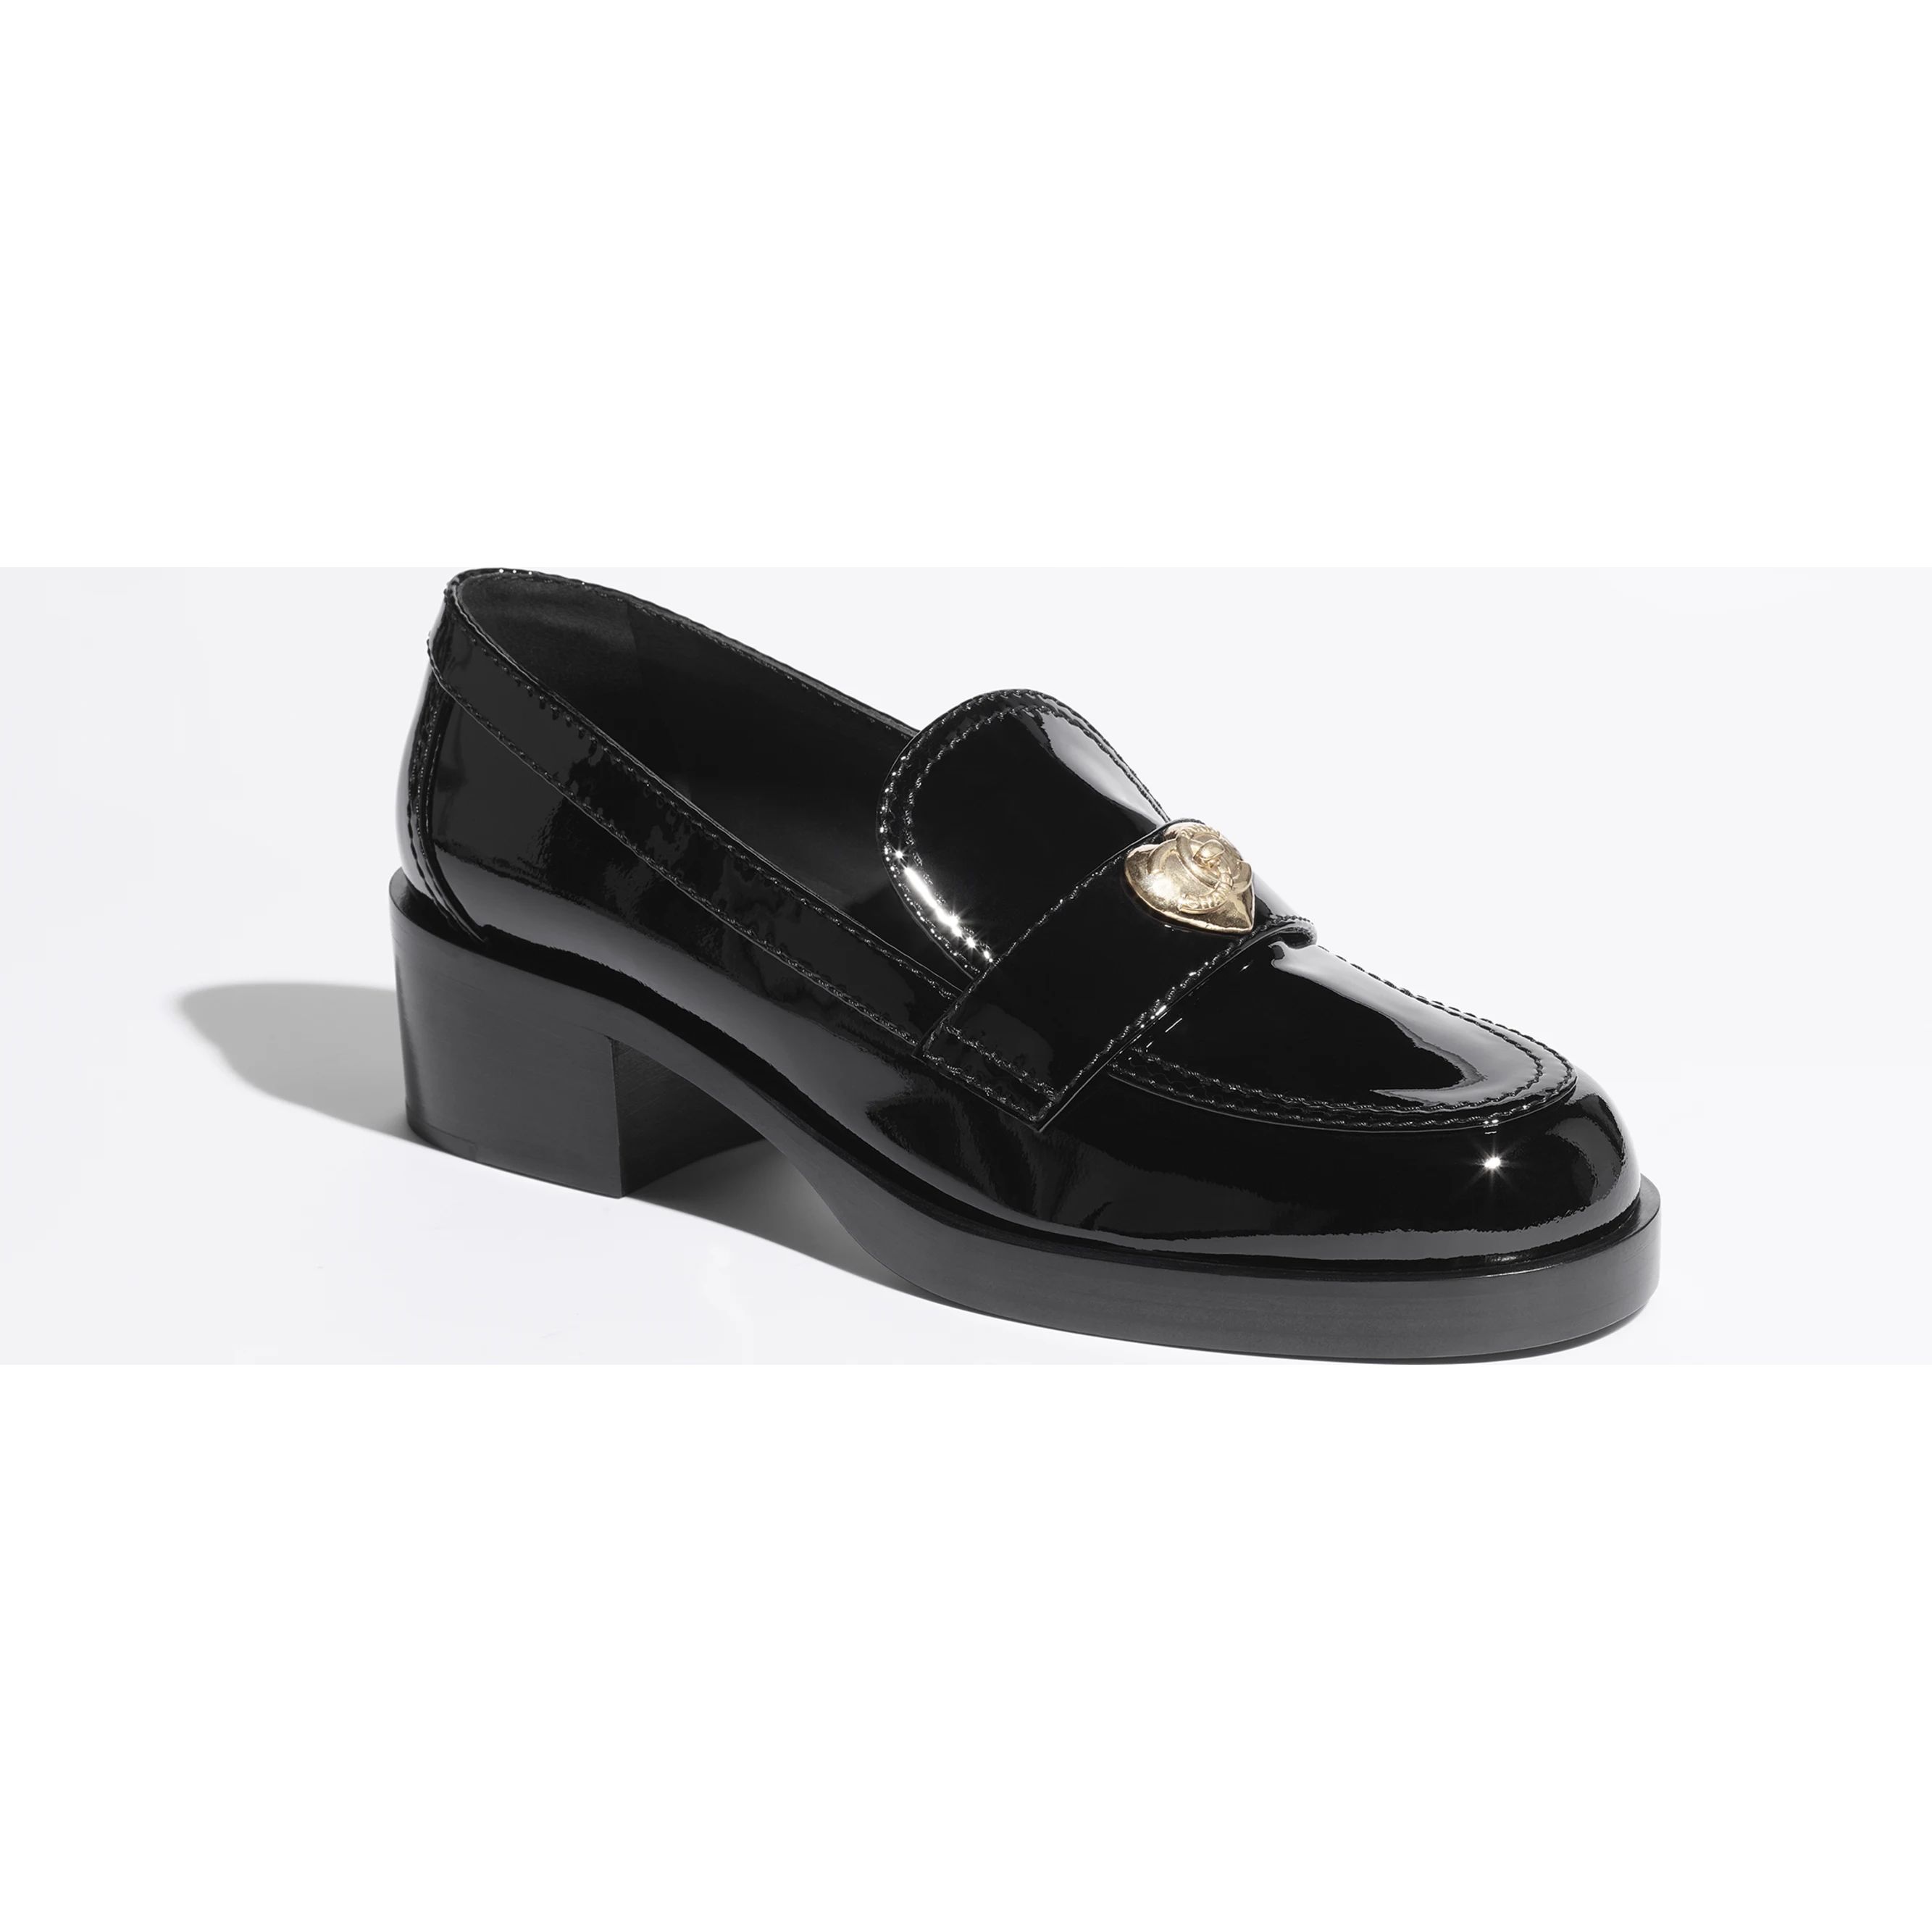 Loafers - Patent calfskin & metal — Fashion | CHANEL | Chanel, Inc. (US)